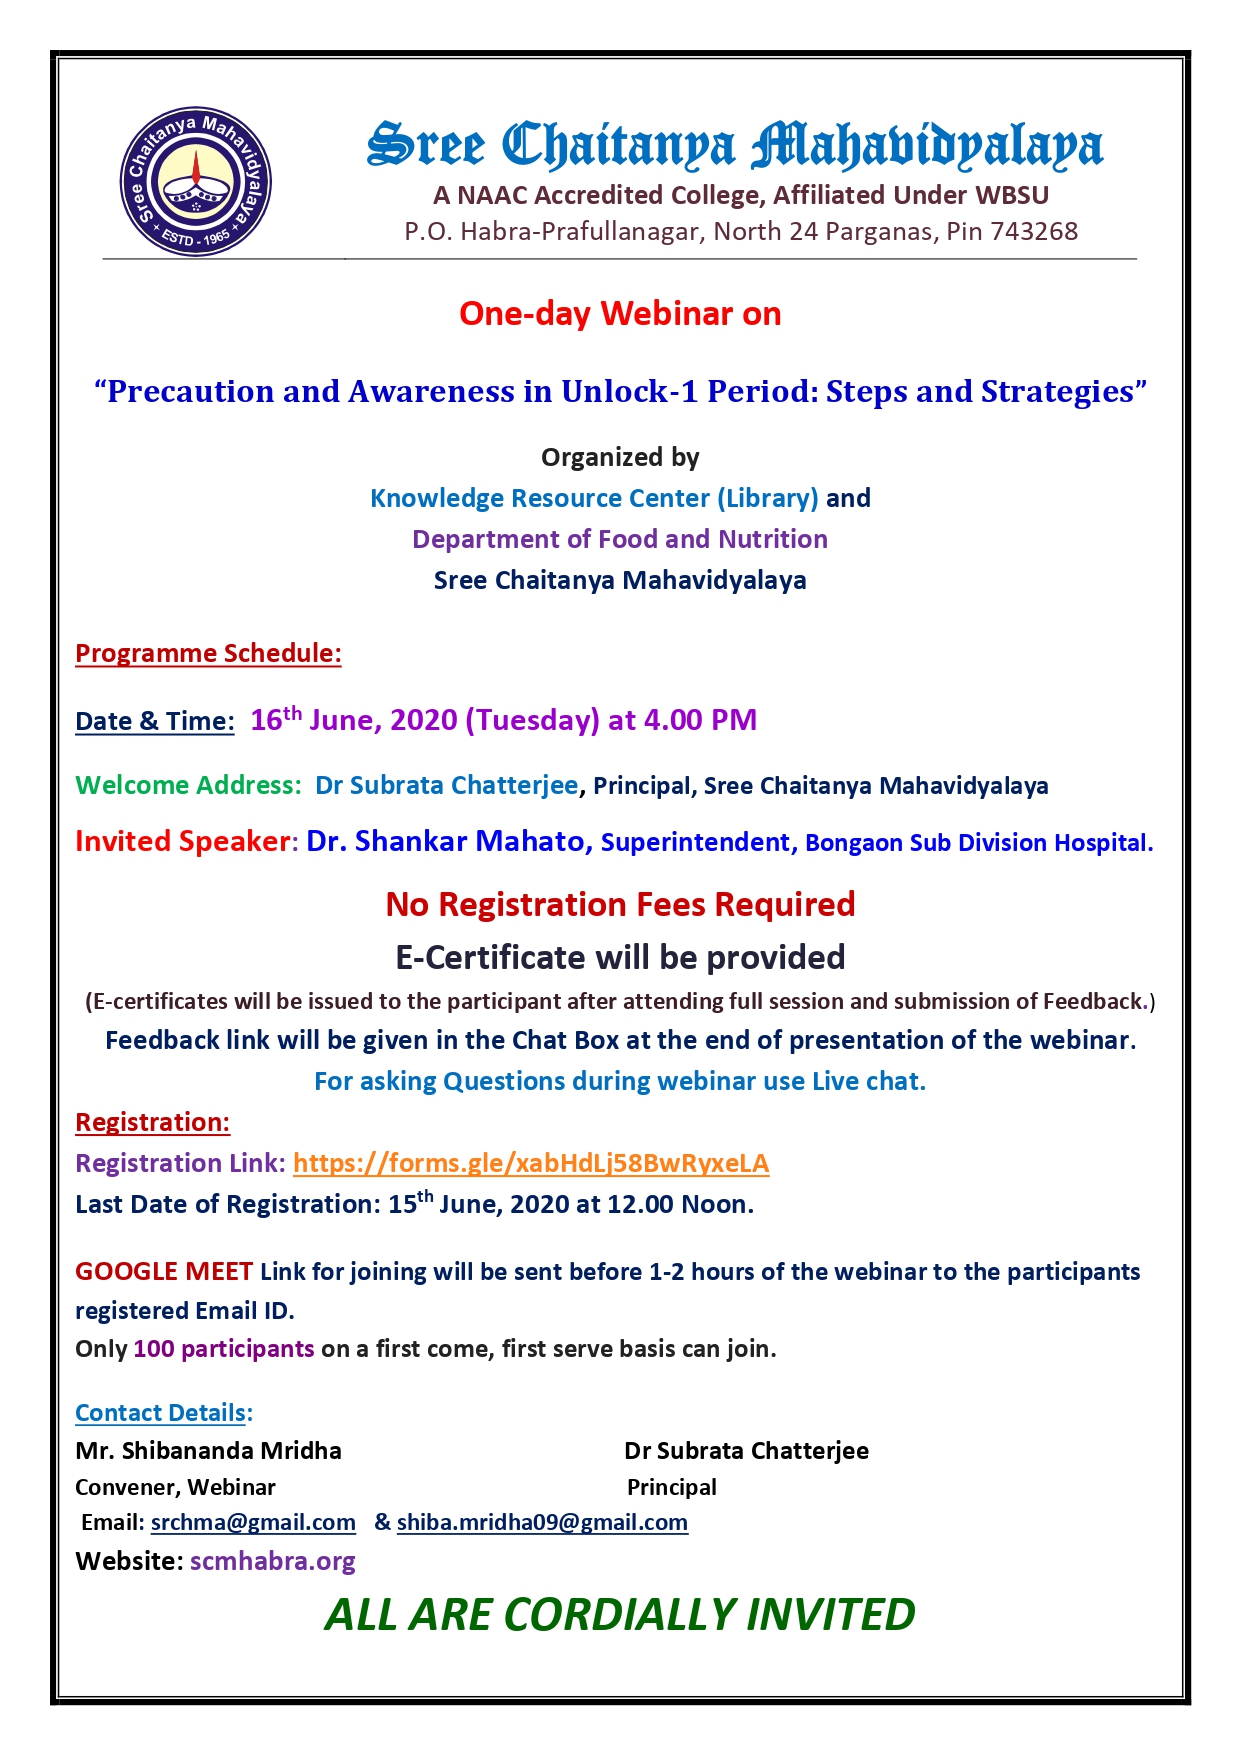 One Day Webinar, Organized By Knowledge Resource Center(Library), 16-06-2020